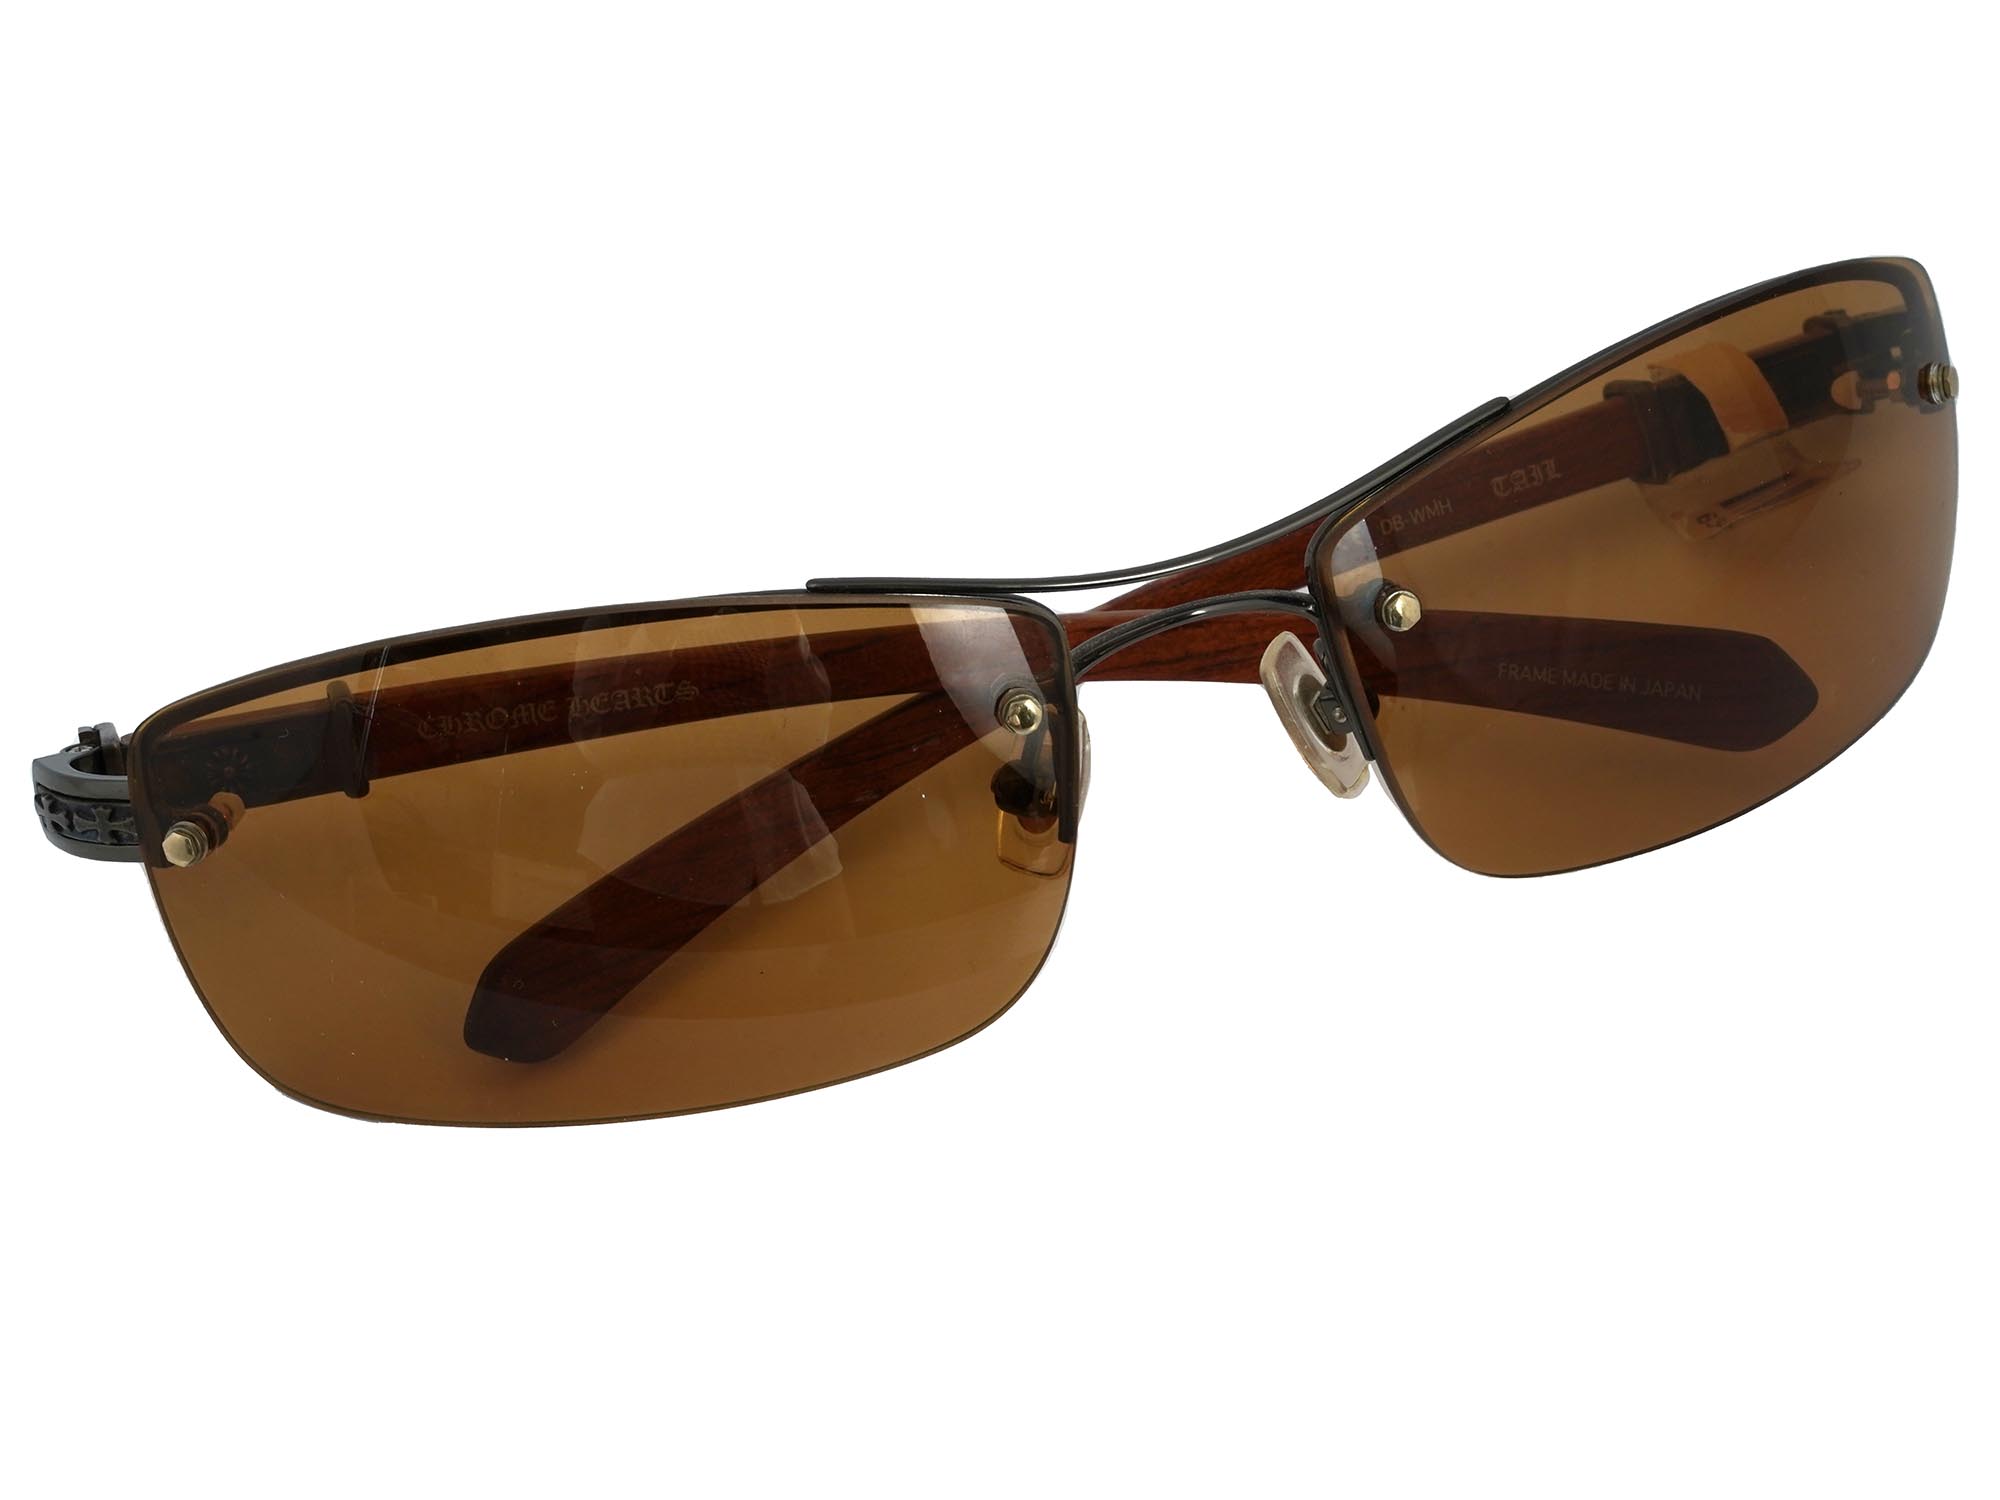 UNISEX AMERICAN SUNGLASSES BY CHROME HEARTS IOB PIC-0